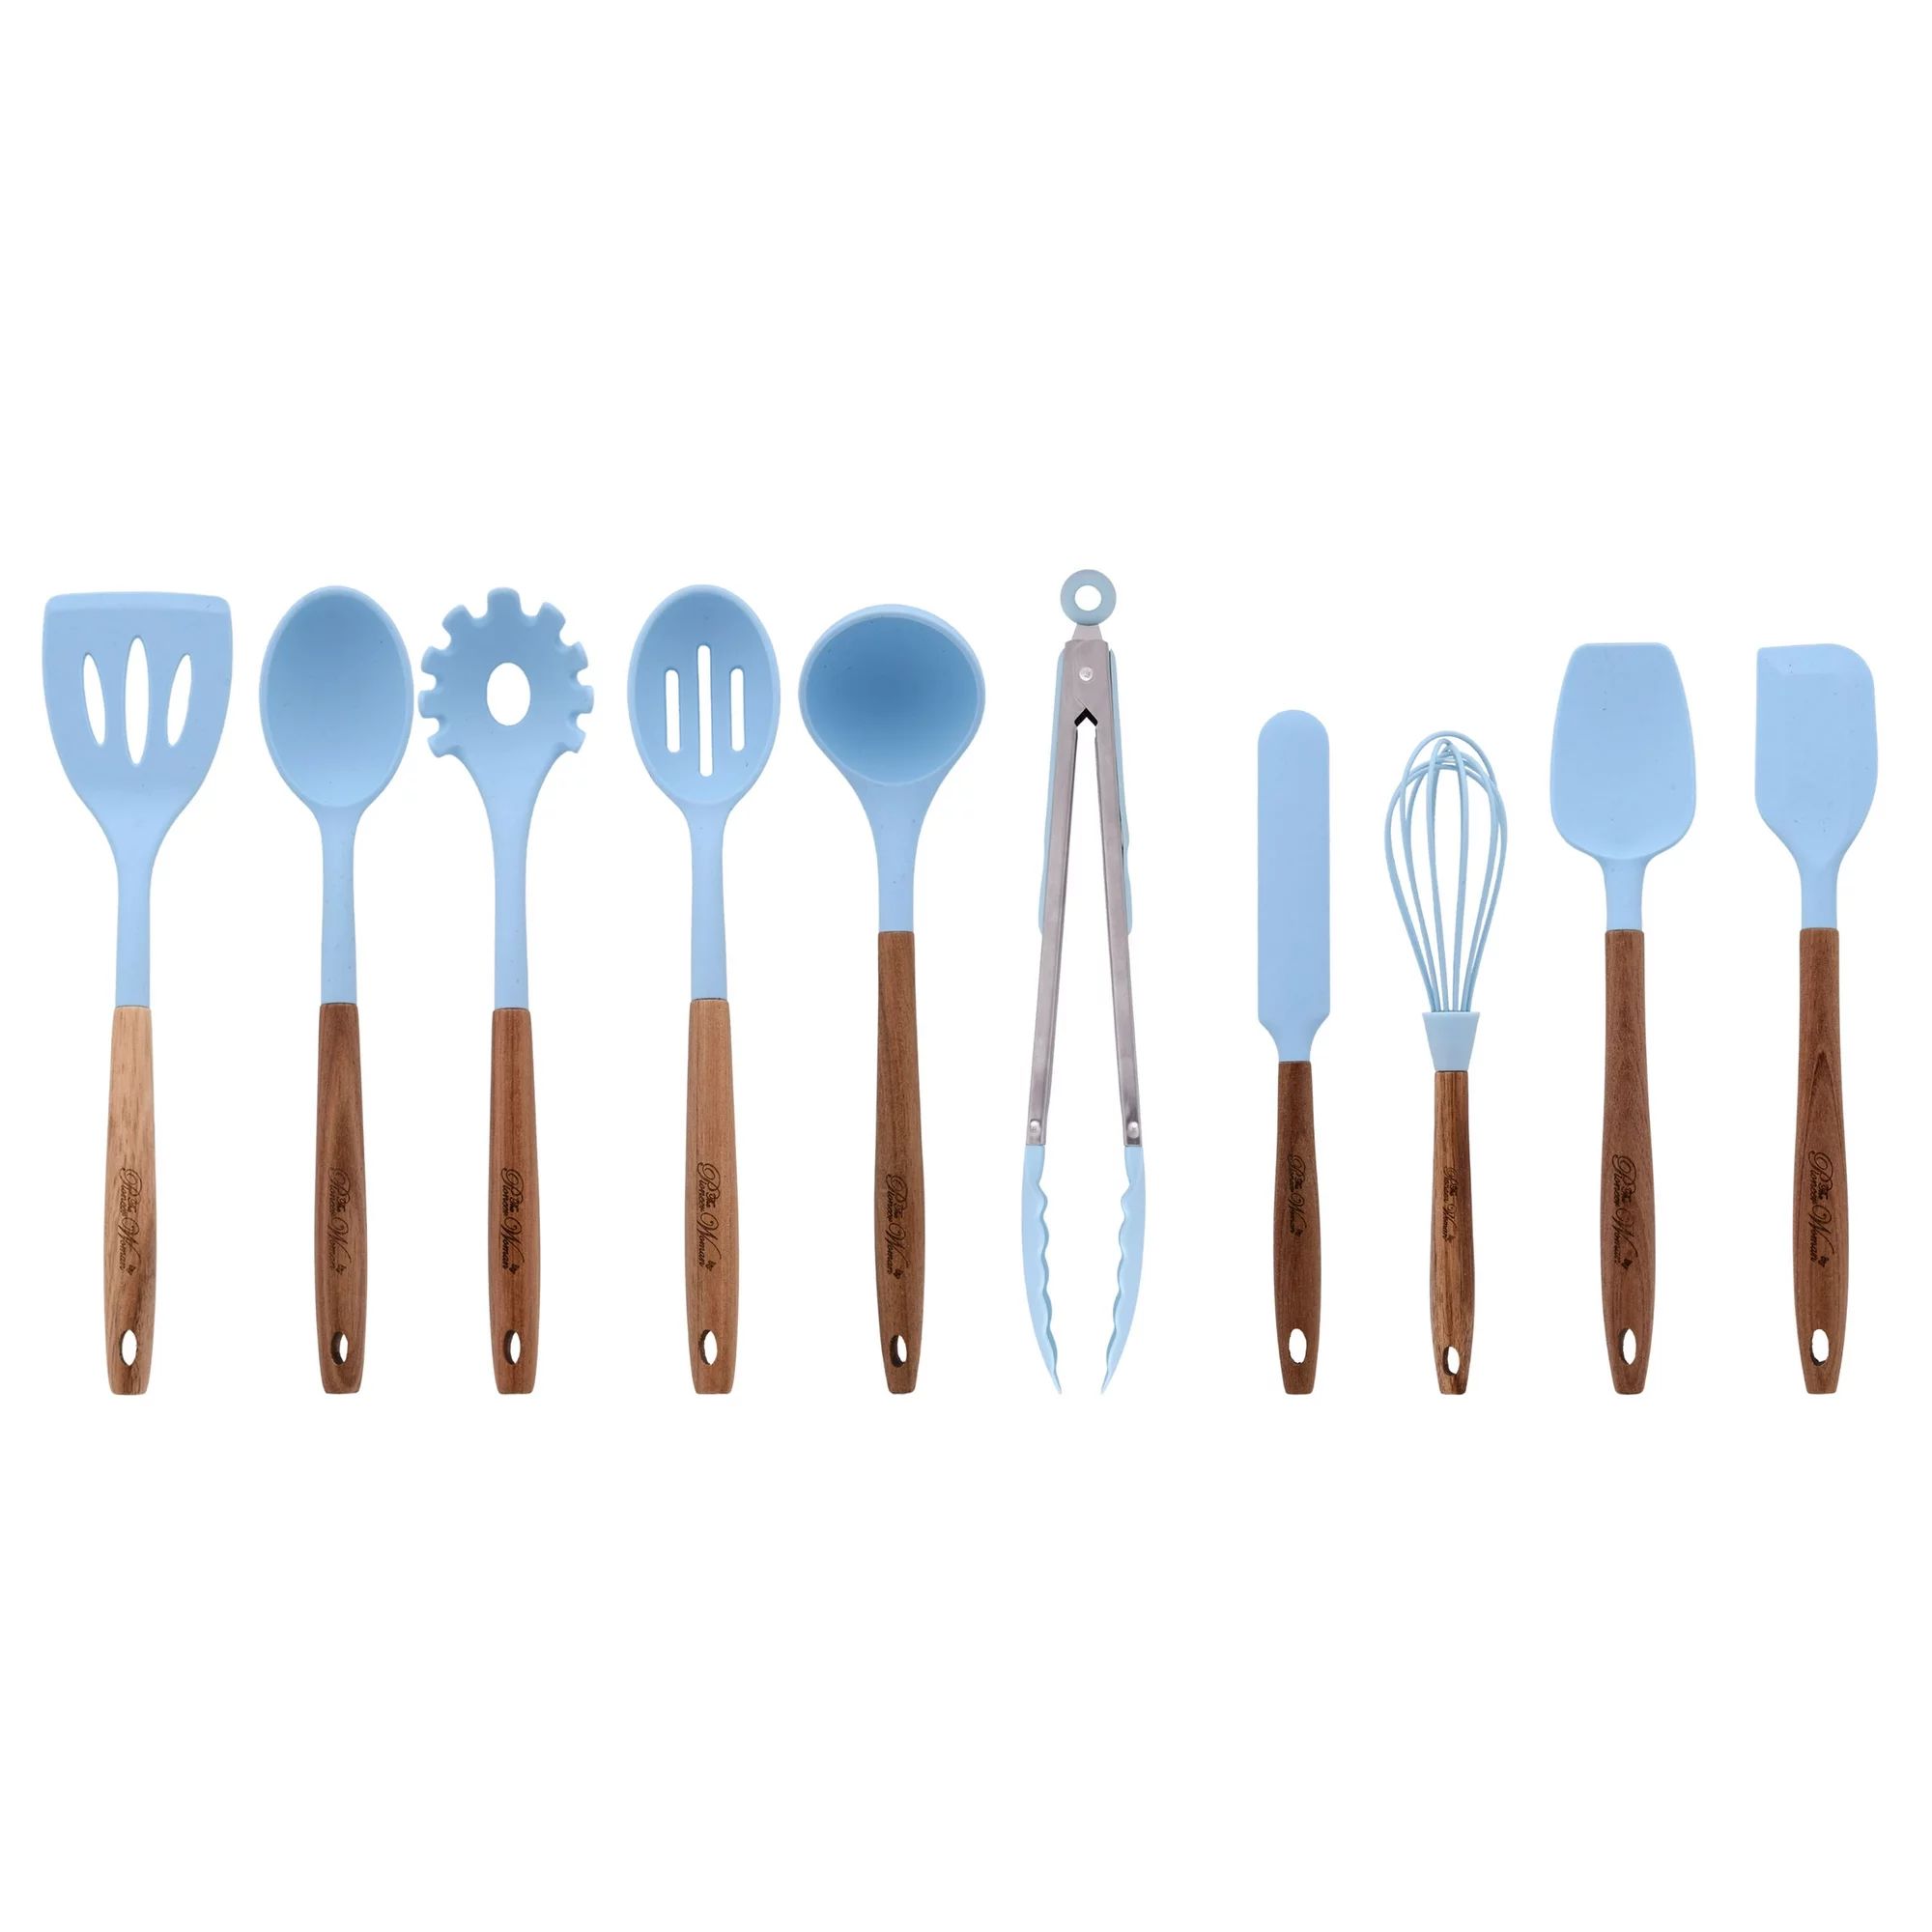 The Pioneer Woman 10-Piece Silicone and Acacia Wood Handle Cooking Utensils Set, Blue | Walmart (US)